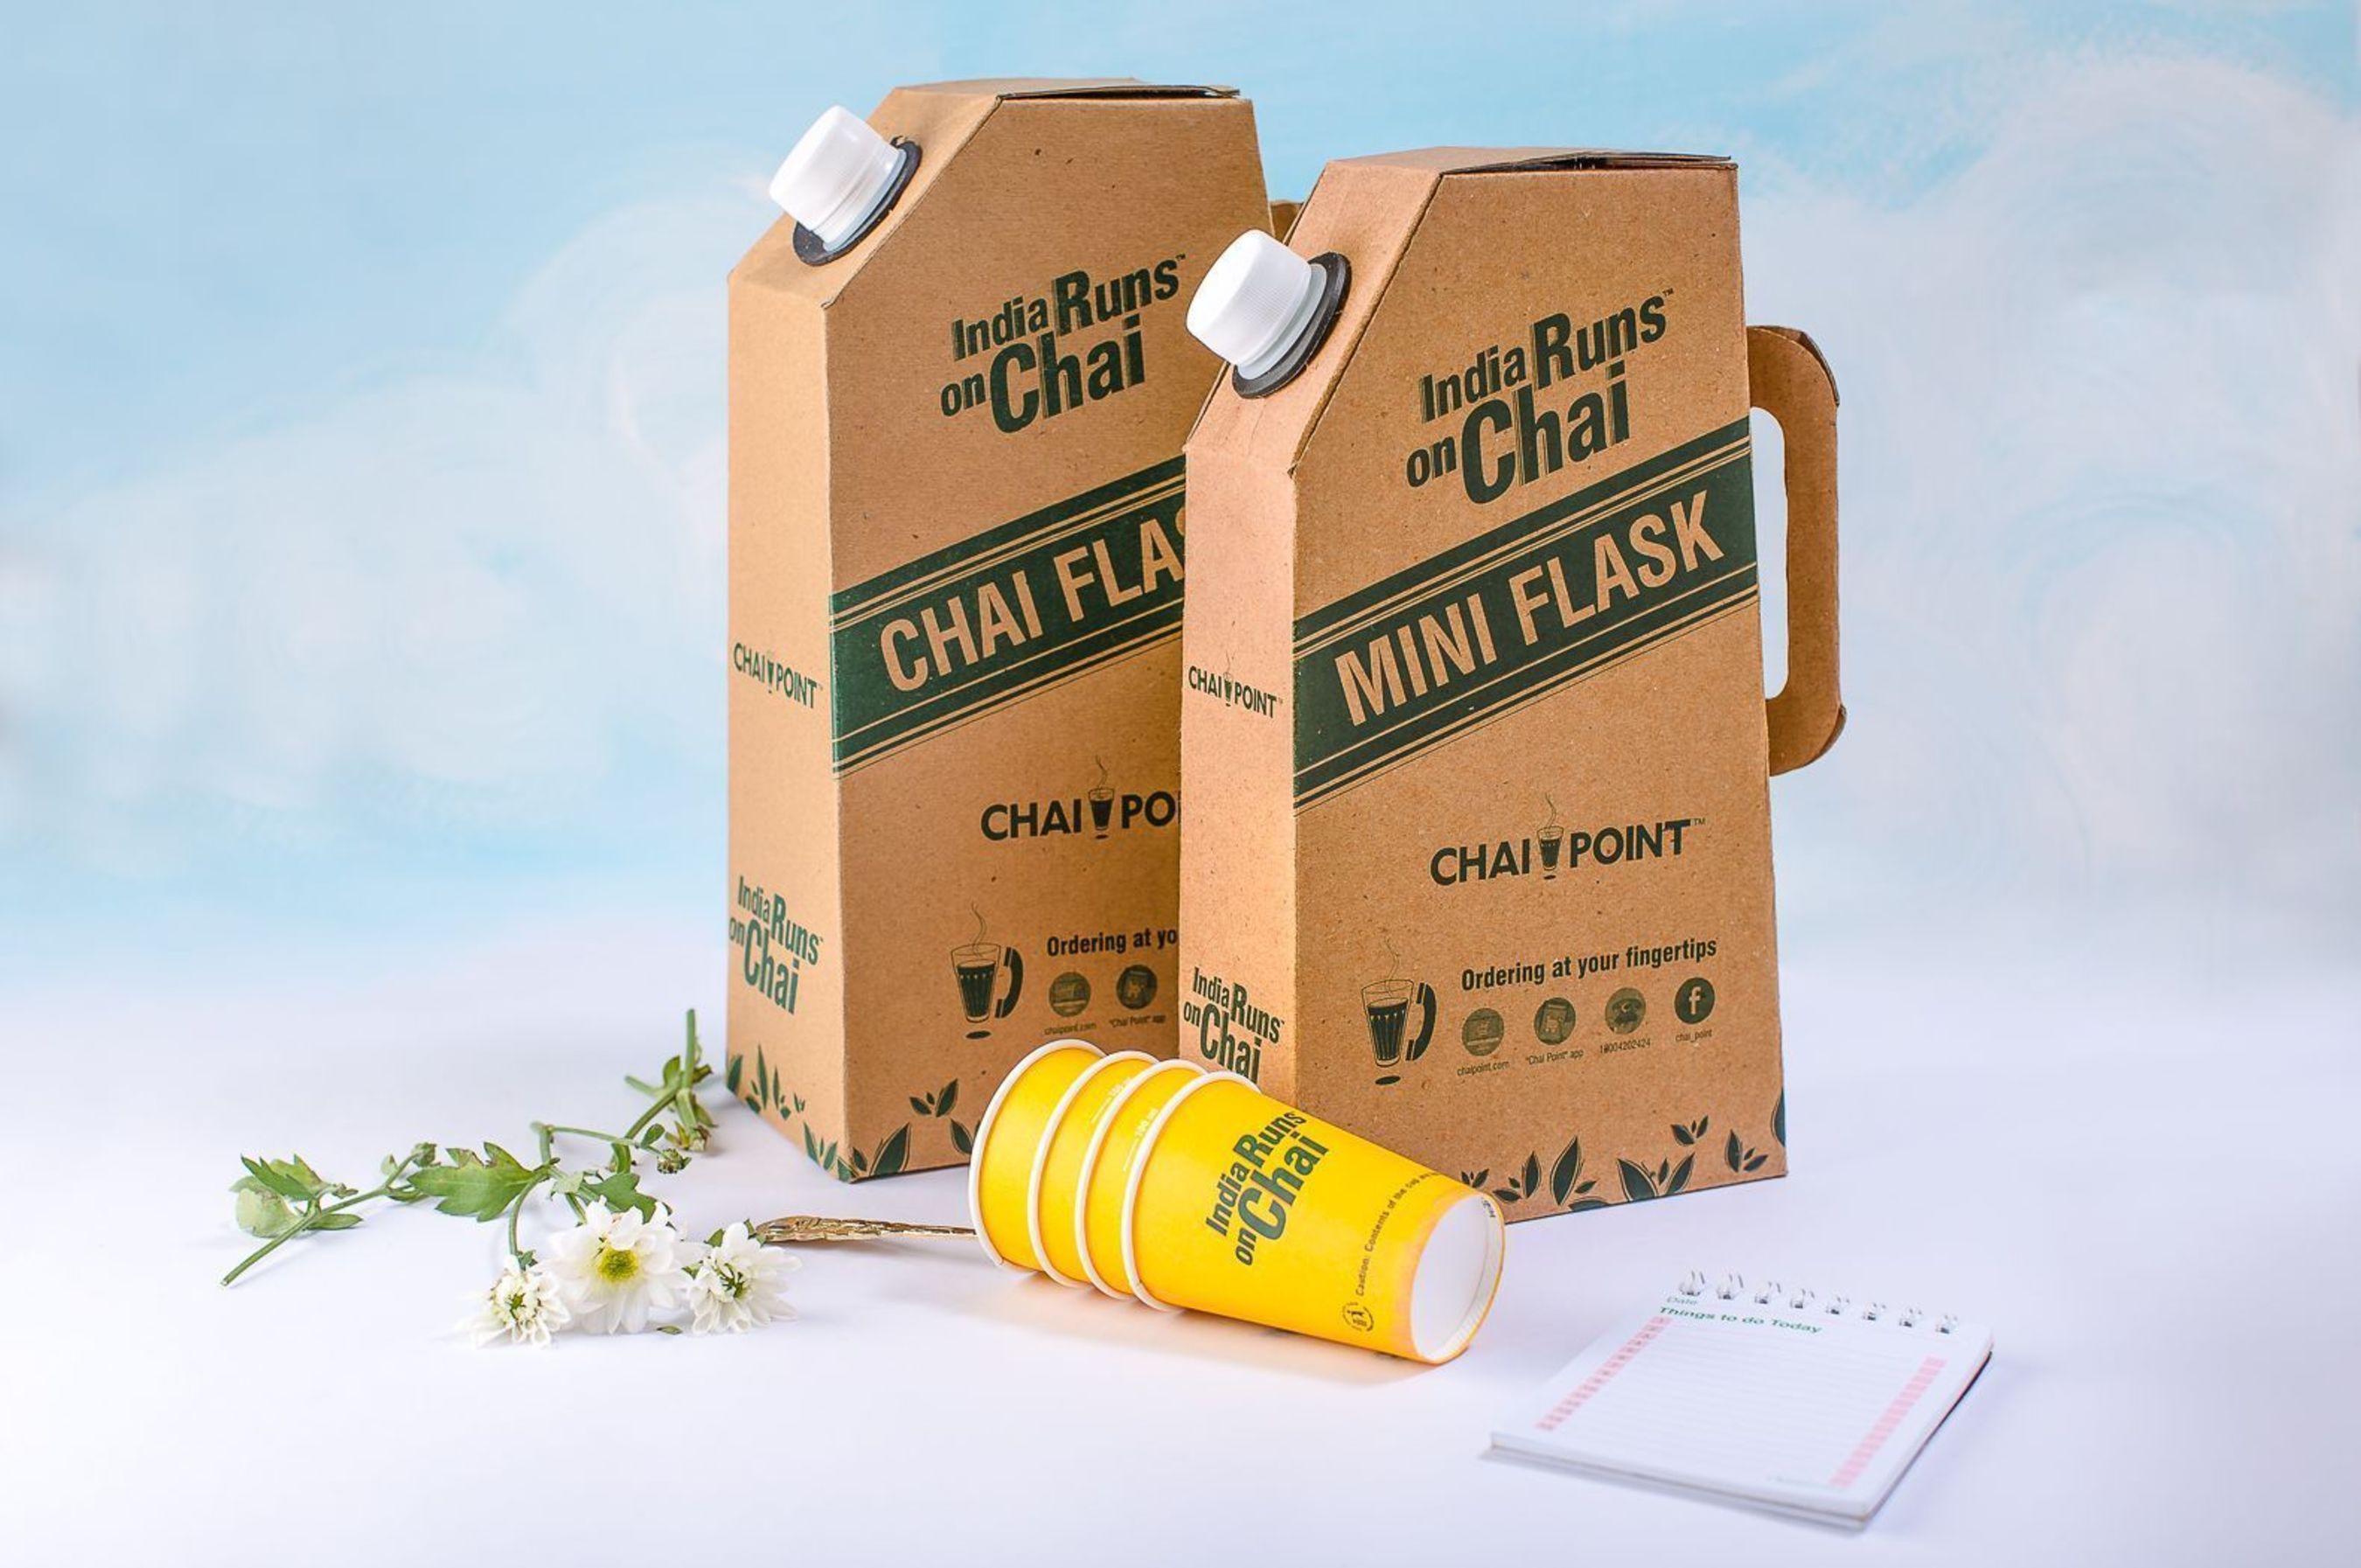 Chai Point's 'Chai Flask': A Design Innovation That Launched a New Business